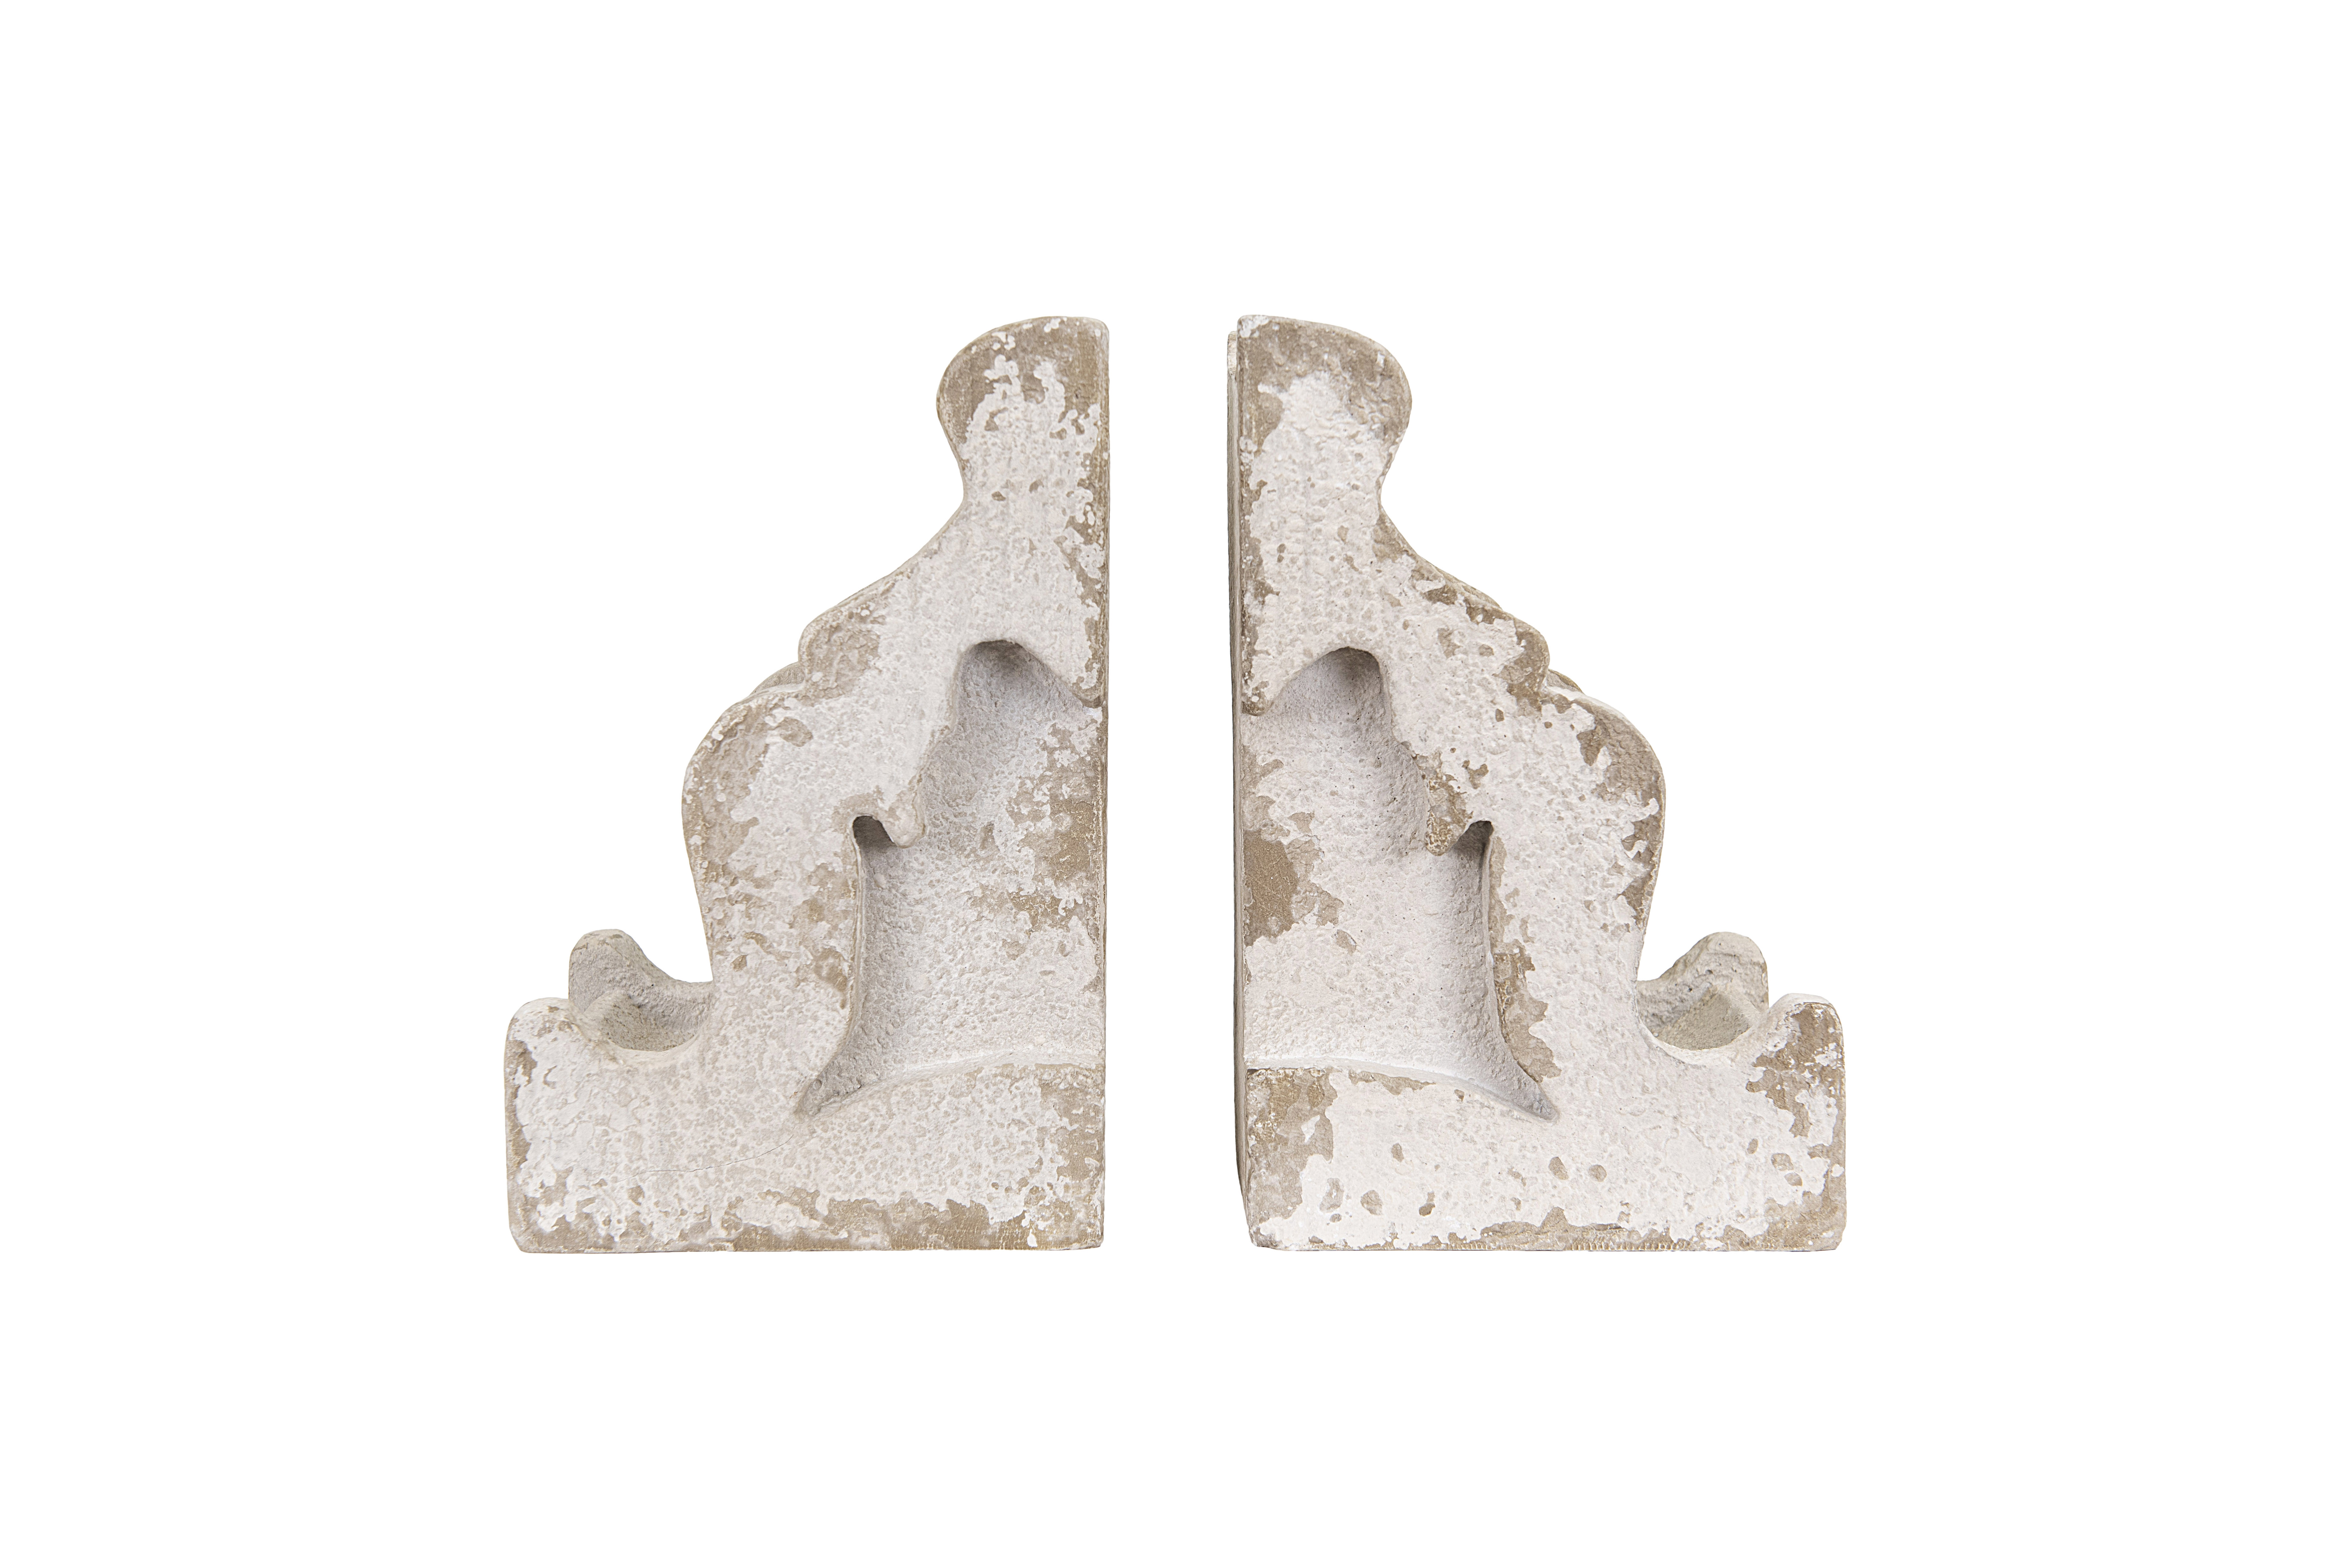 Distressed Corbel Shaped Bookends, White, Set of 2 - Nomad Home